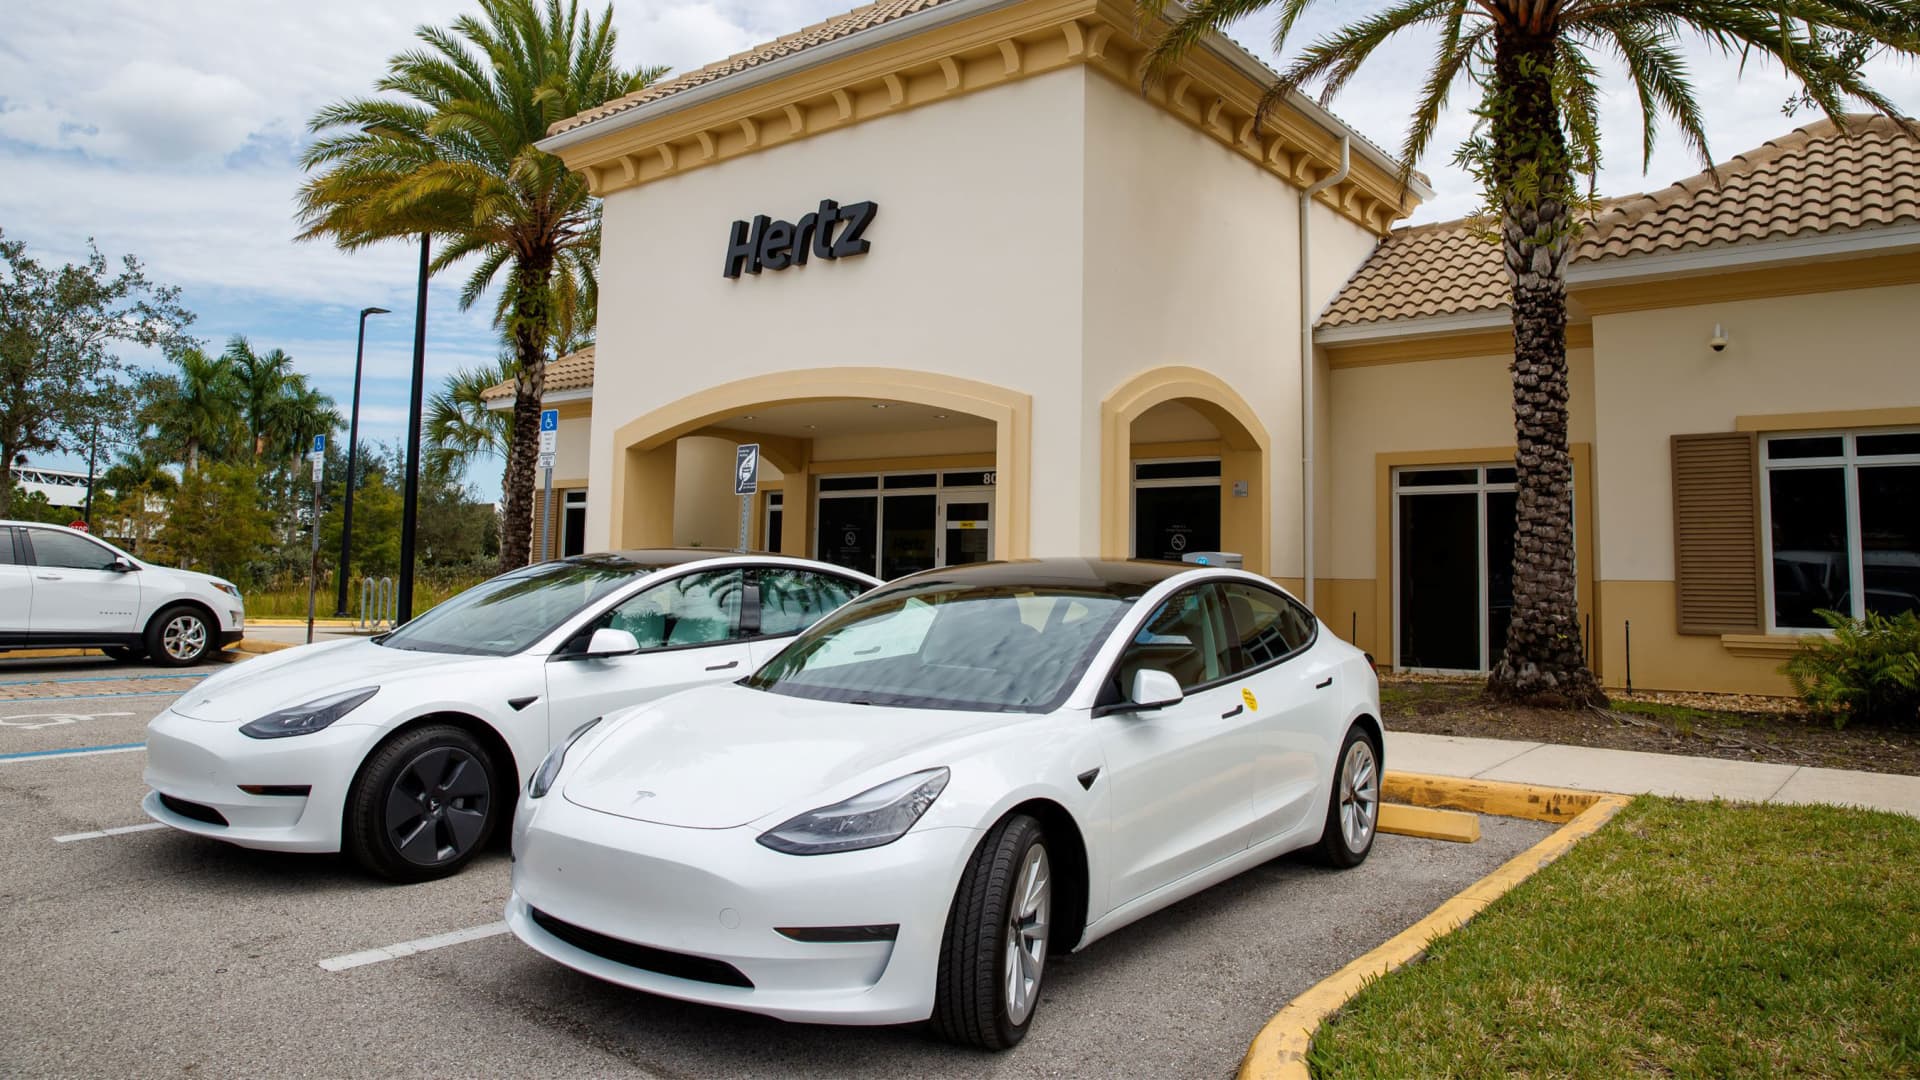 Hertz is teaming up with oil giant BP to install thousands of EV chargers in the U.S. – CNBC